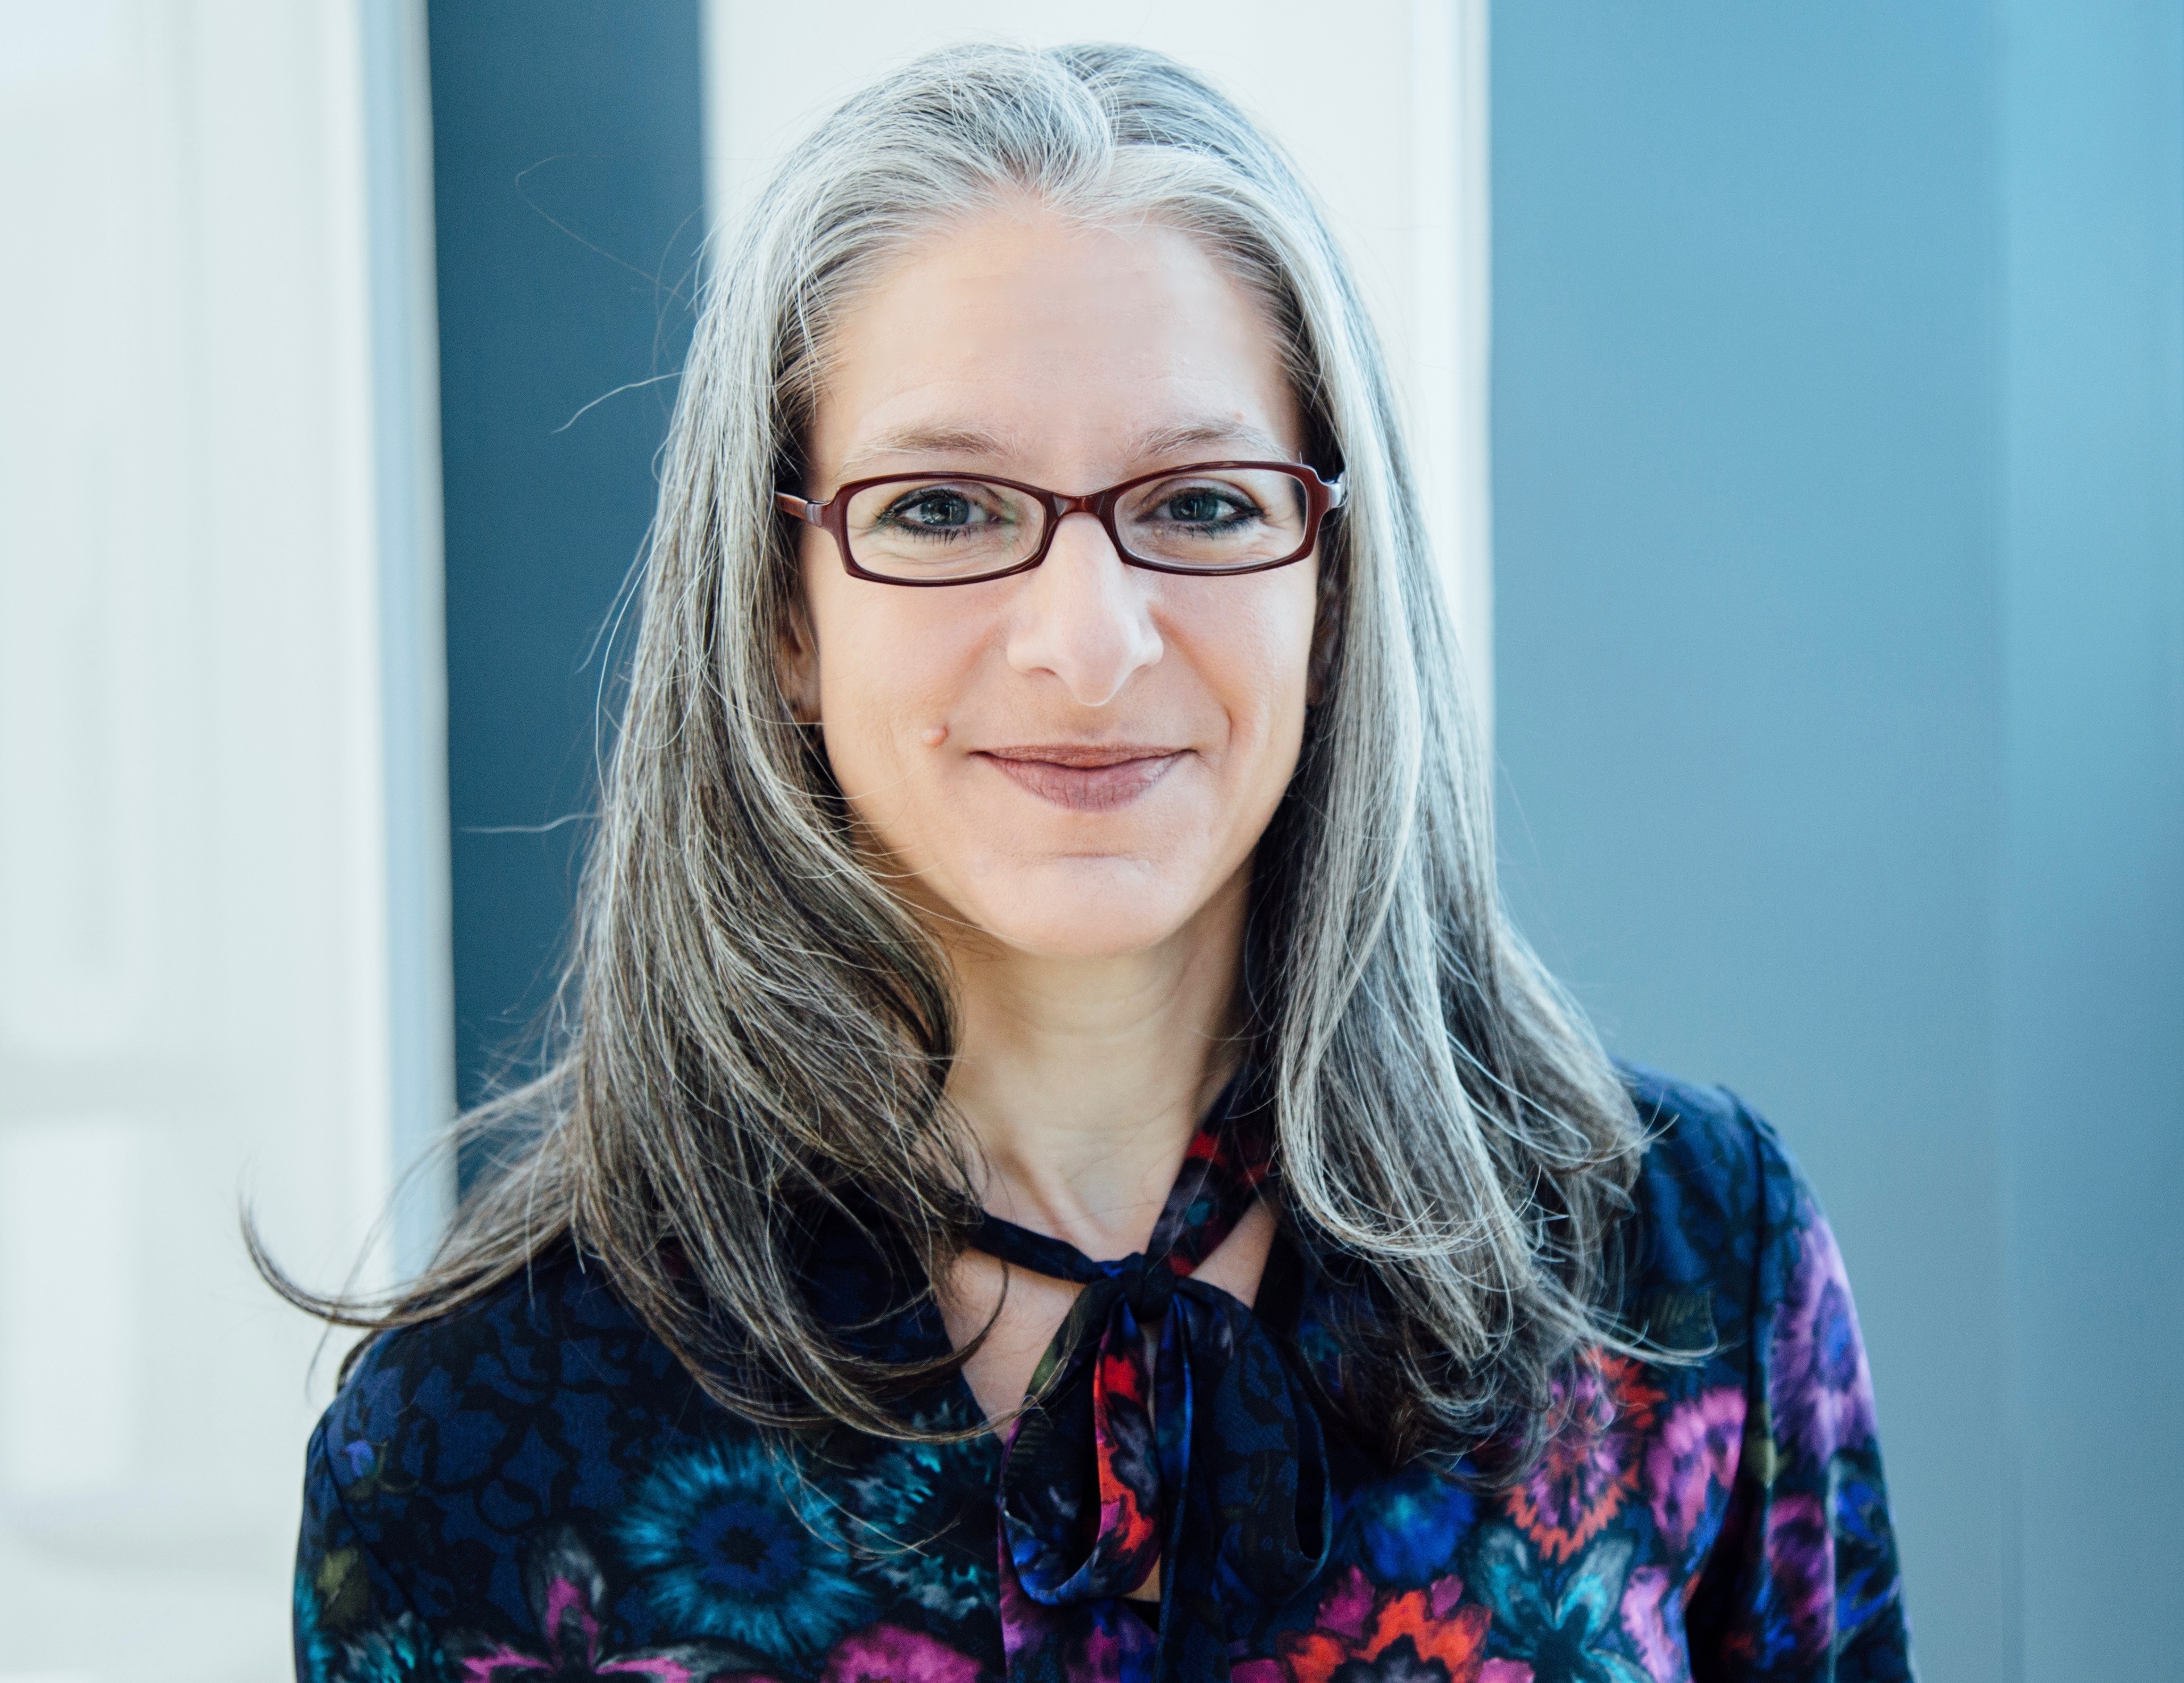 Sarah Kaplan, Director of the Institute for Gender and the Economy, Distinguished Professor of Gender & the Economy, and Professor of Strategic Management at the Rotman School of Management